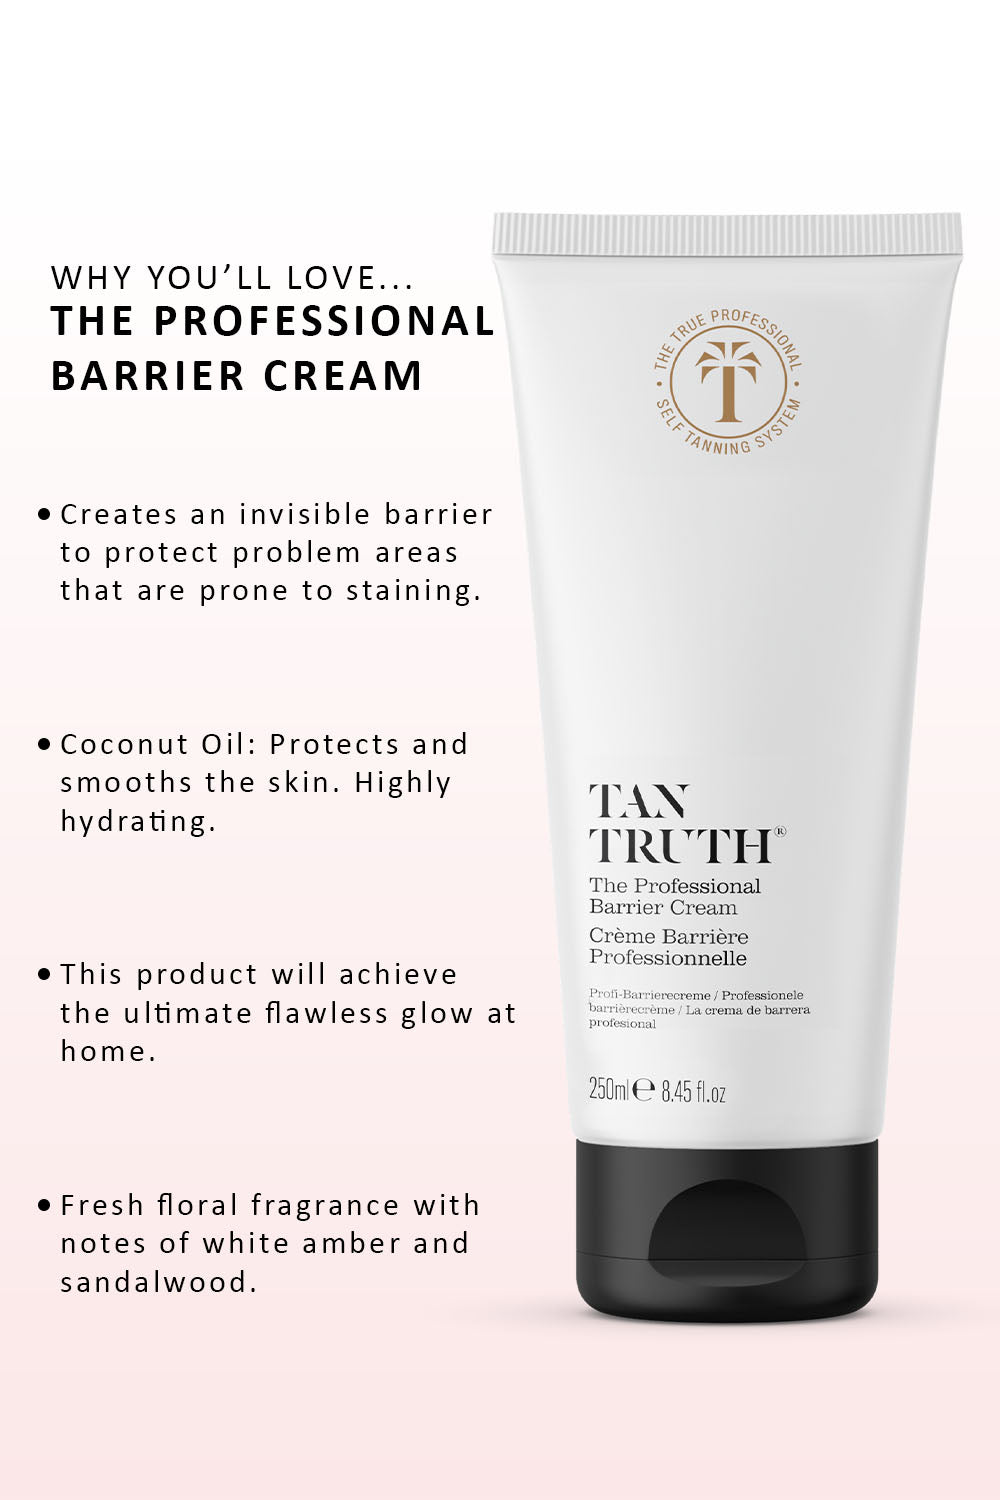 The Professional Barrier Cream